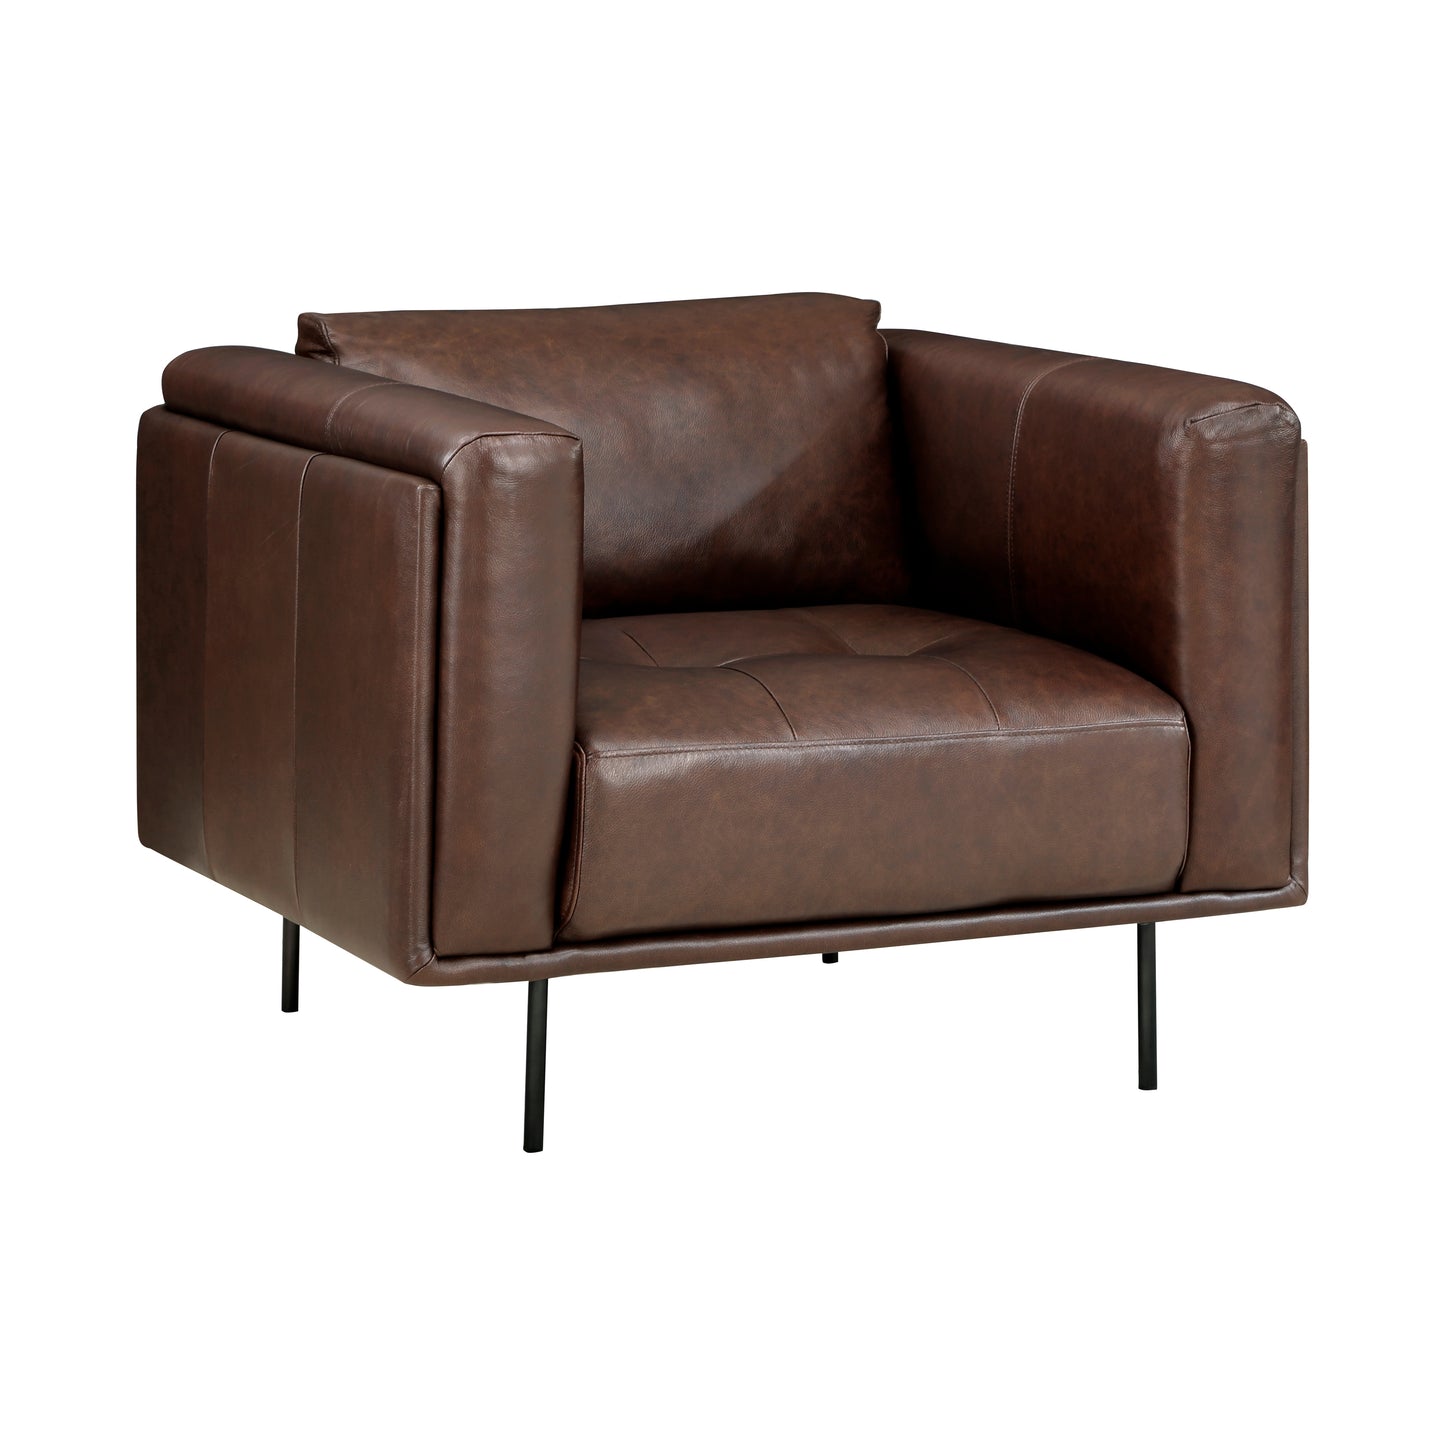 Soren Top Grain Leather Sofa BROWN ONLY 100% LEATHER